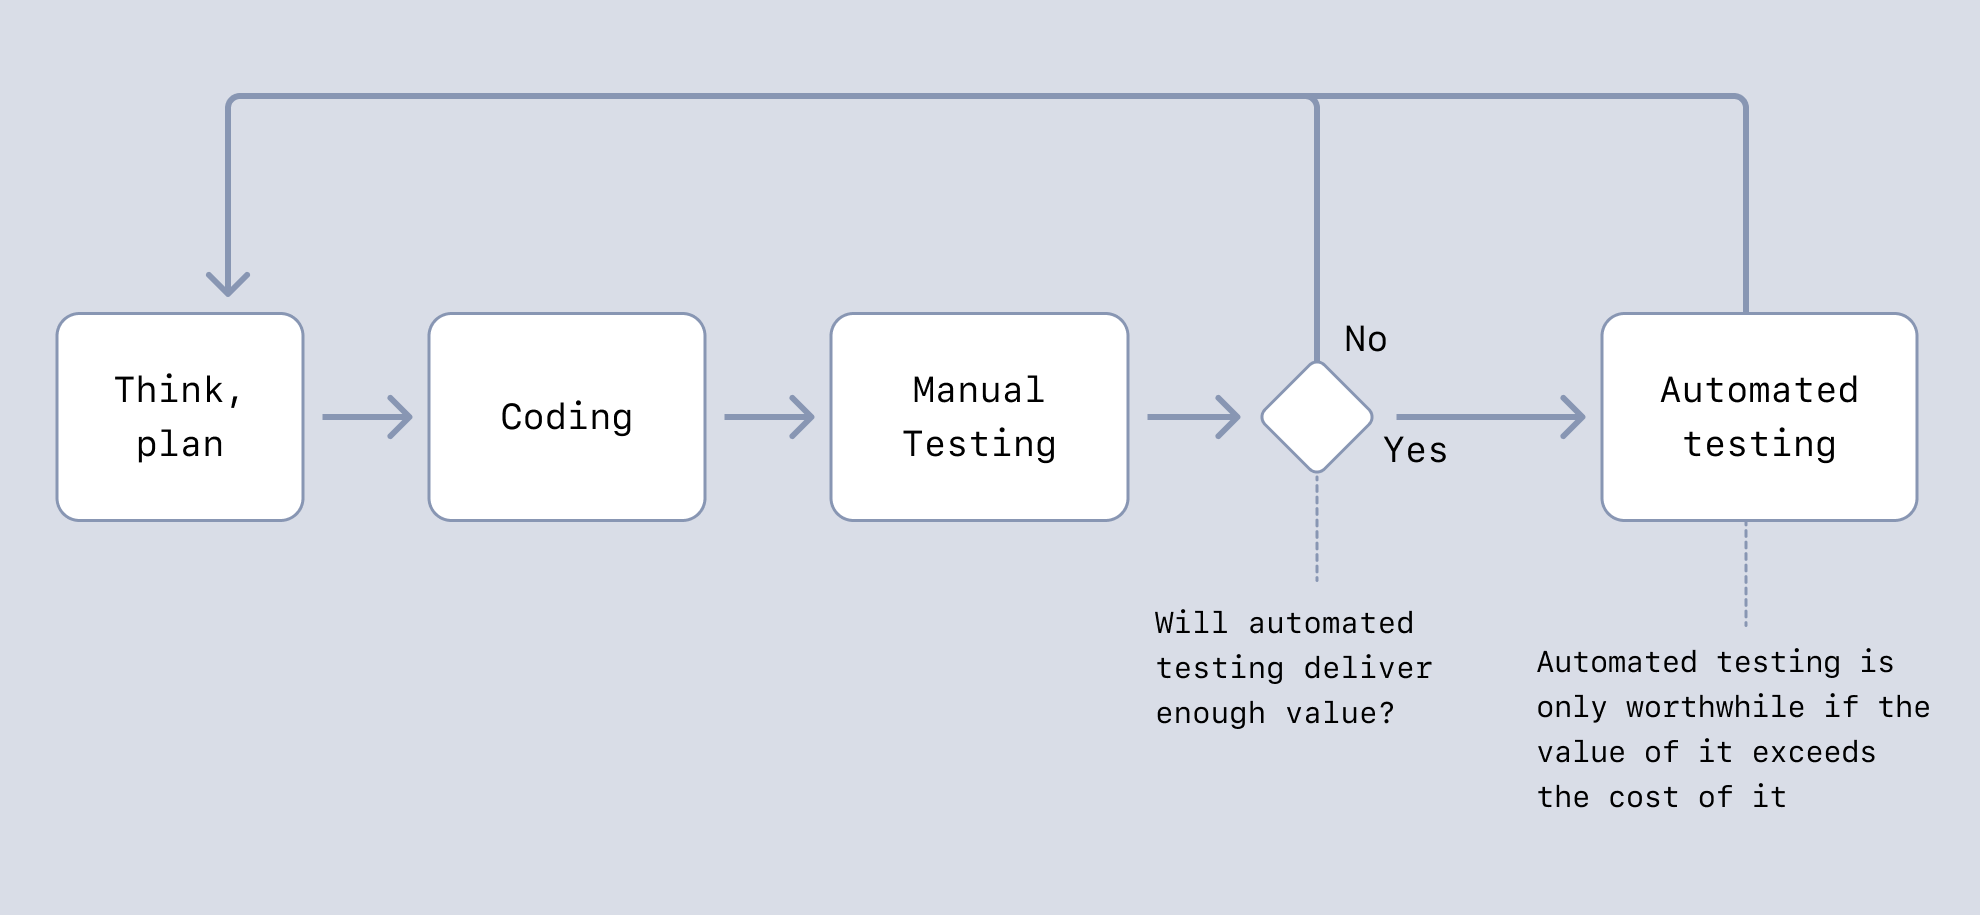 Manual testing followed by automated testing